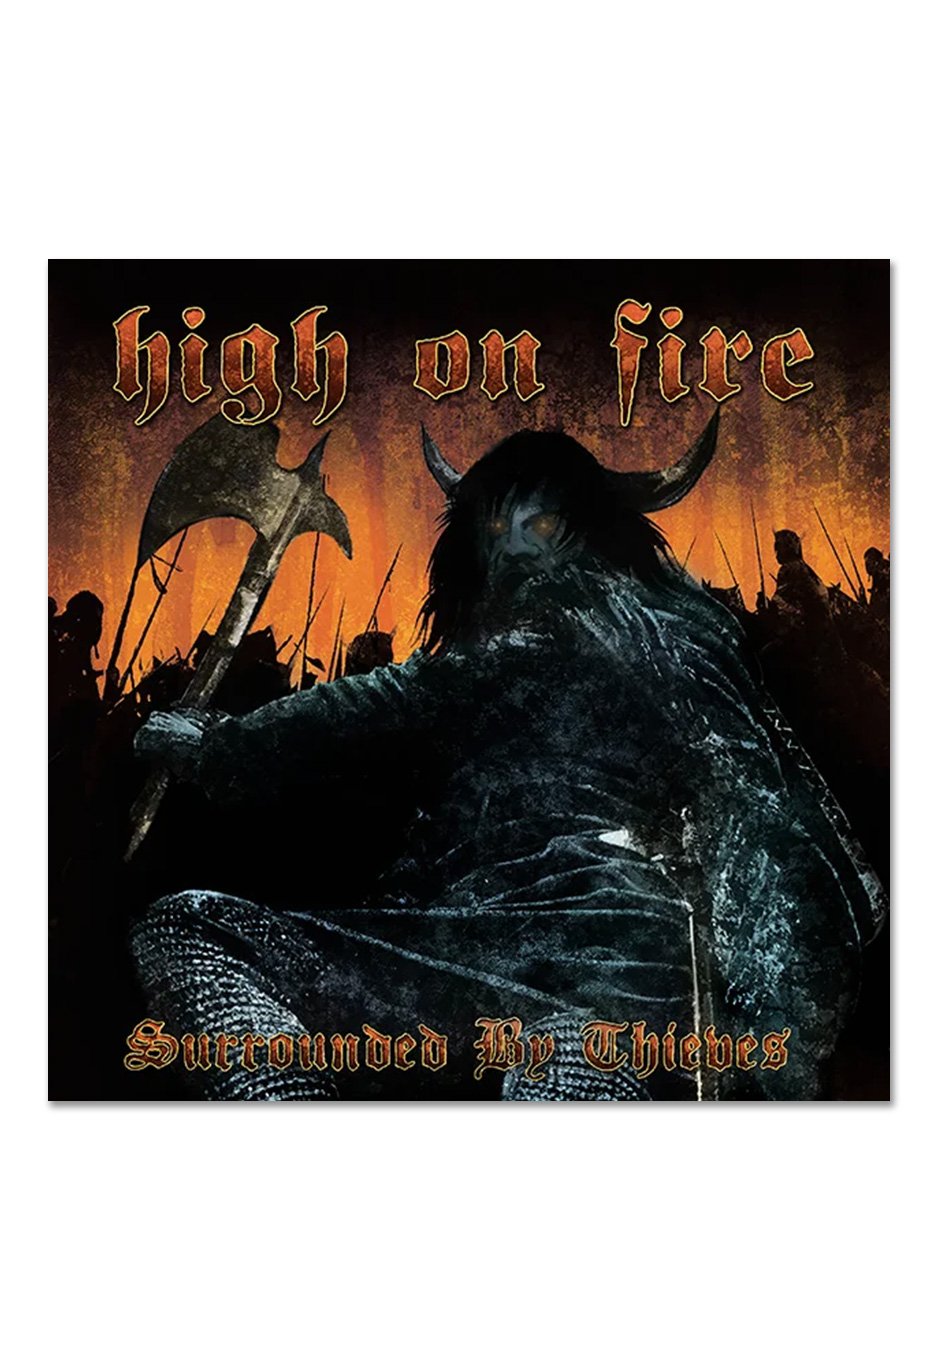 High On Fire - Surrounded By Thieves Aqua Blue Galaxy - Colored 2 Vinyl